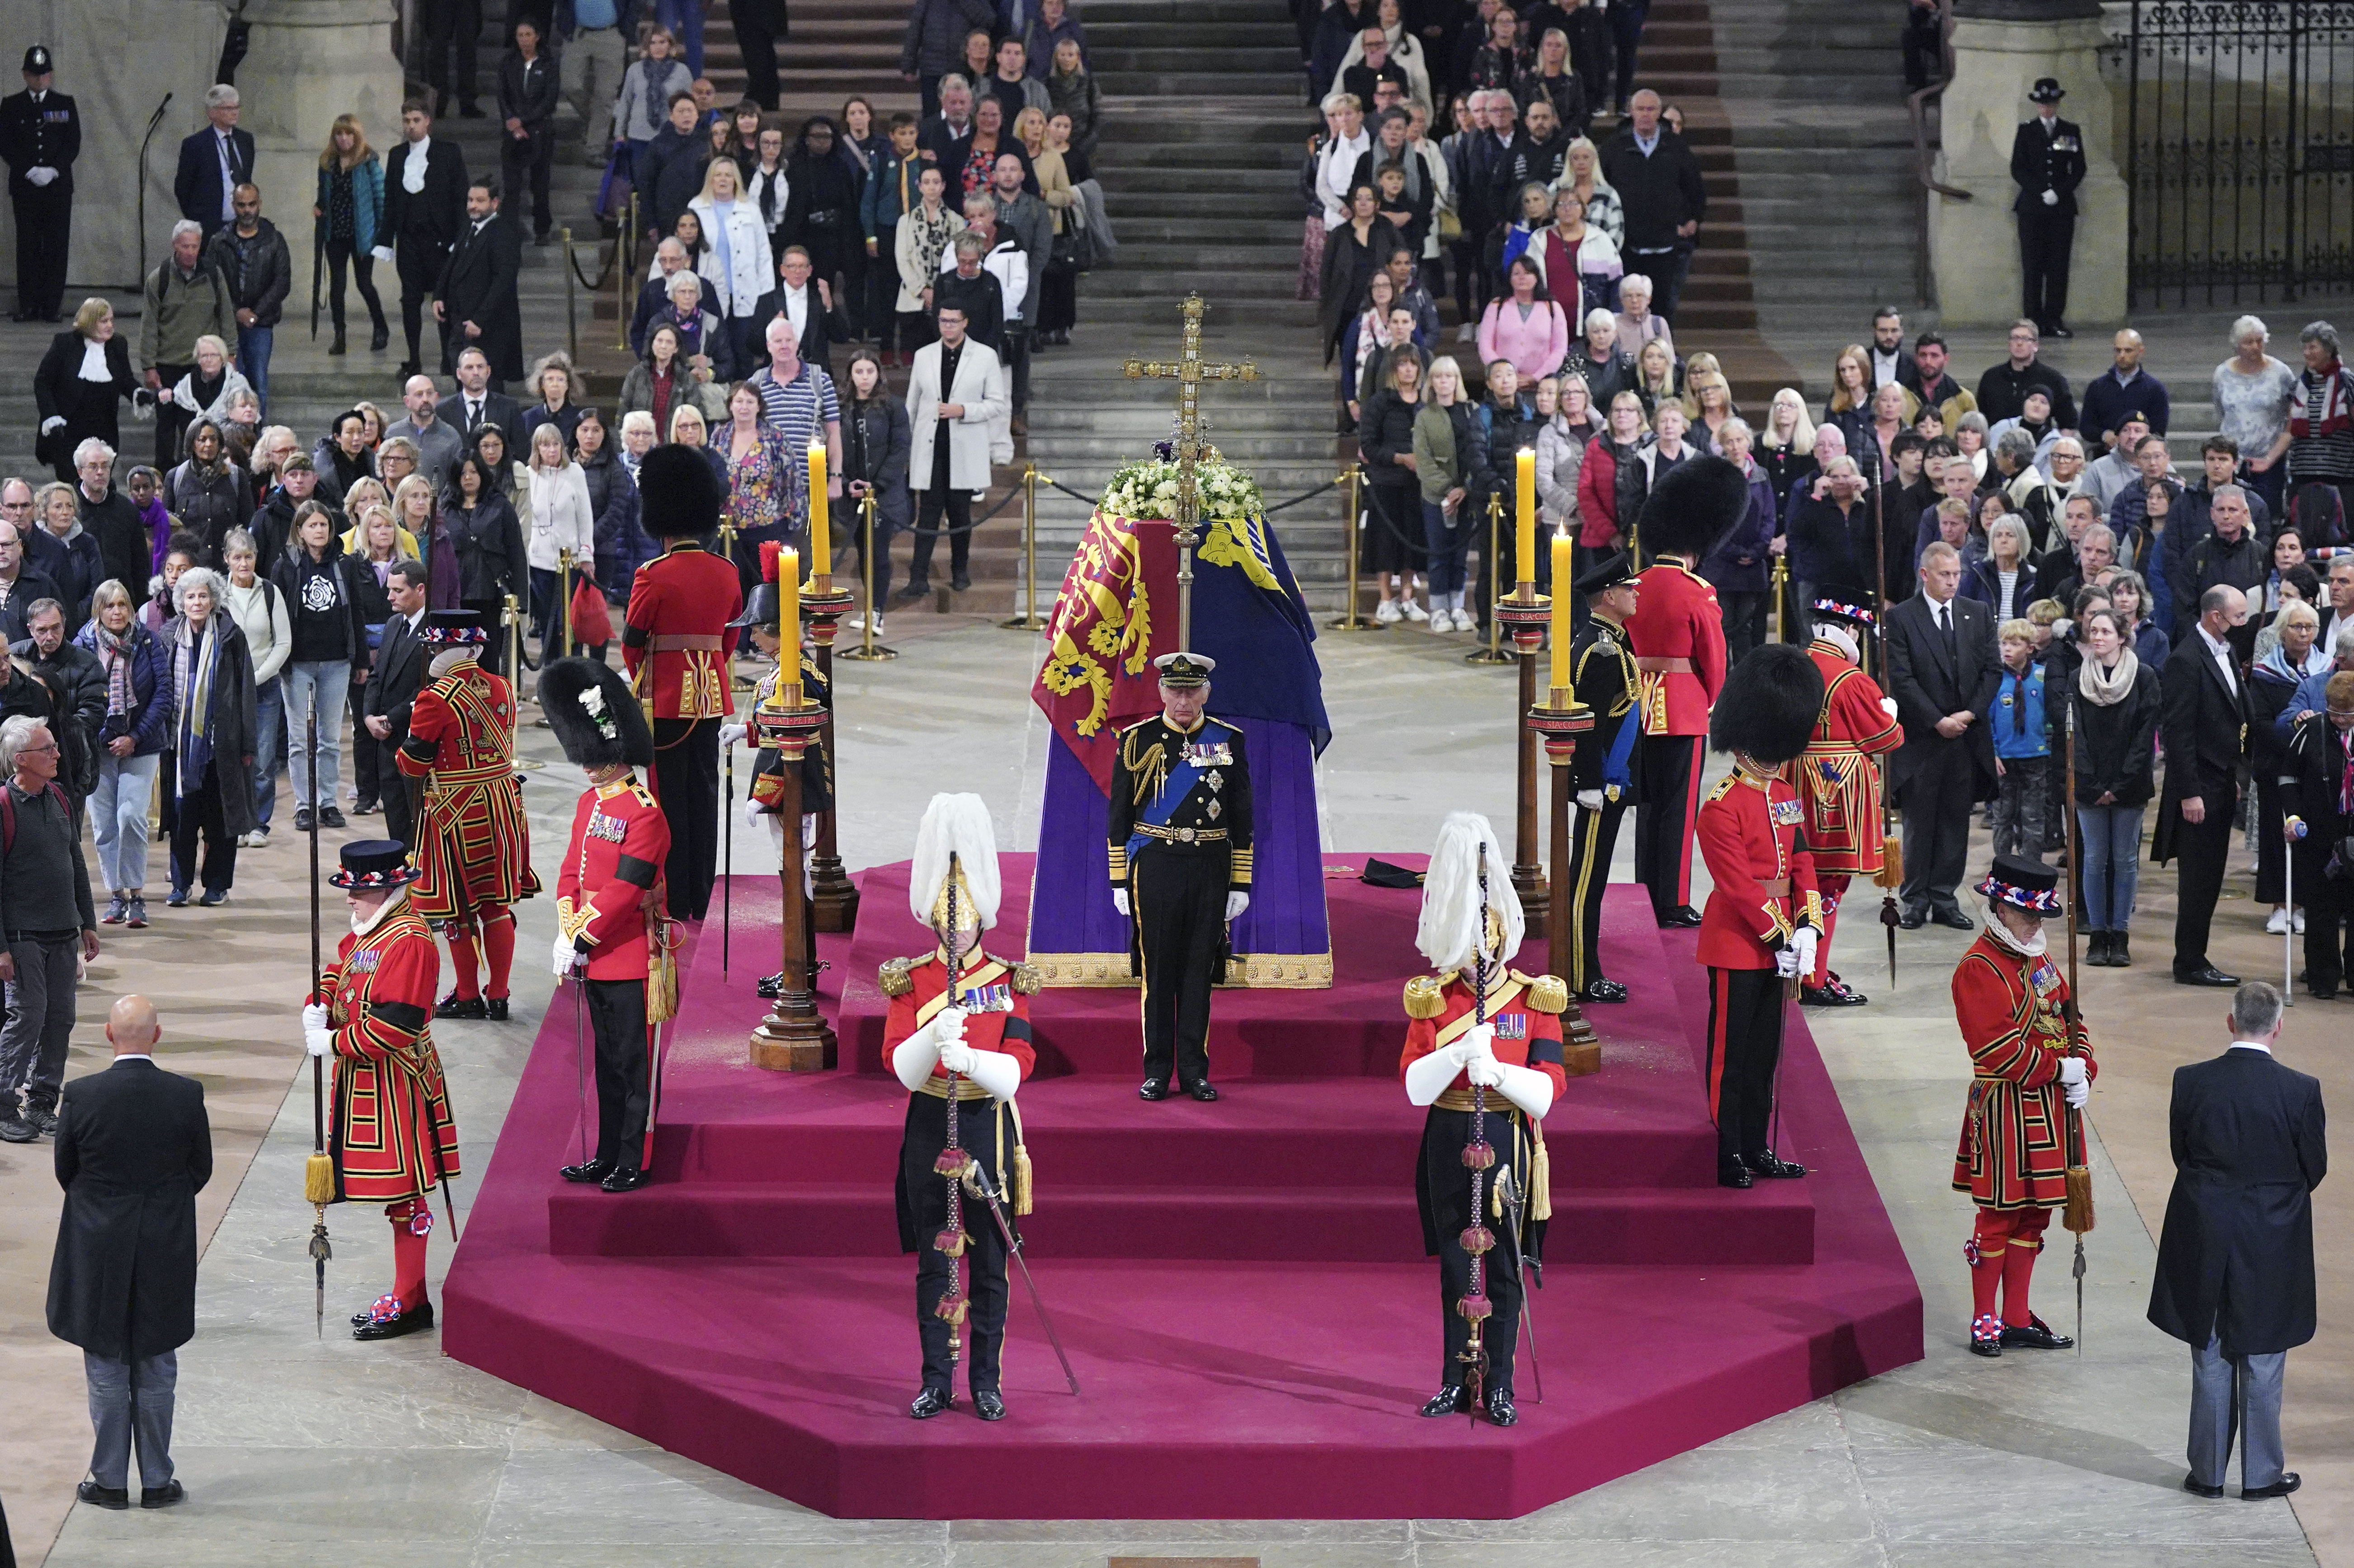 Members of the public file past as King Charles III, the Princess Royal, the Duke of York and the Earl of Wessex hold a vigil beside the coffin of their mother, Queen Elizabeth II, as it lies in state on the catafalque in Westminster Hall, at the Palace of Westminster, London, Friday Sept. 16, 2022. (Yui Mok/Pool Photo via AP)